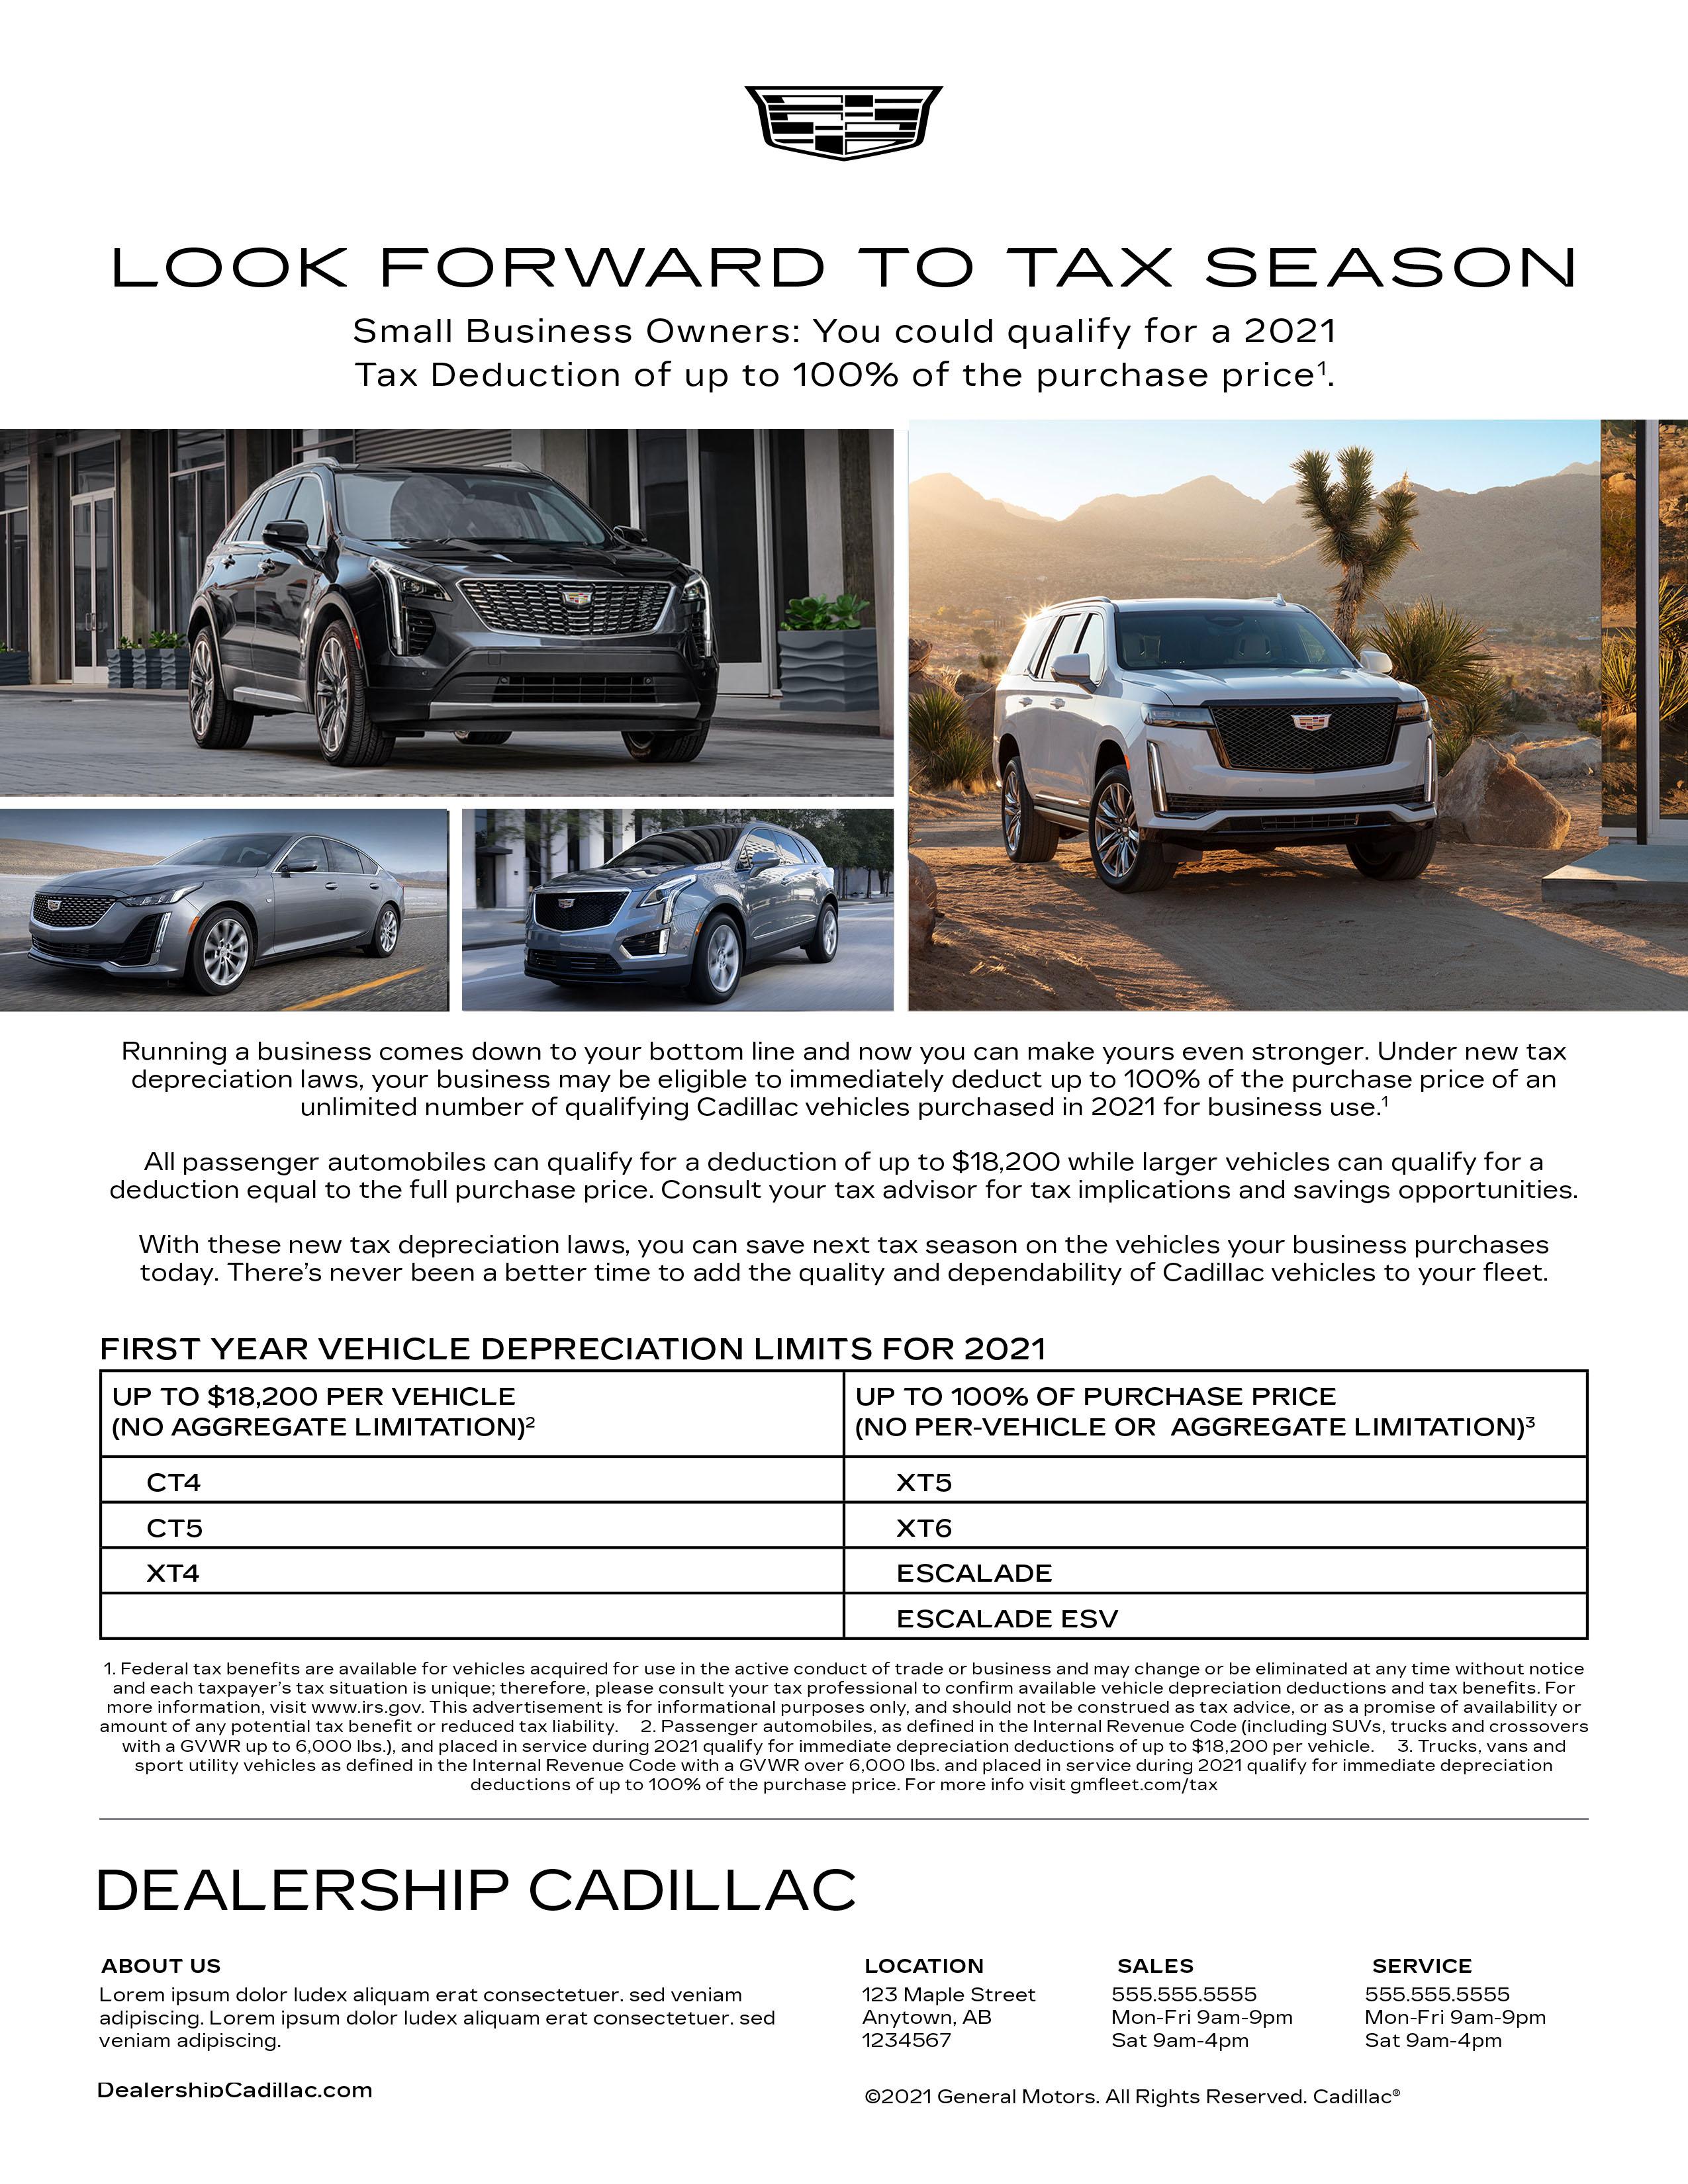 2021 Tax Flyer Section 179